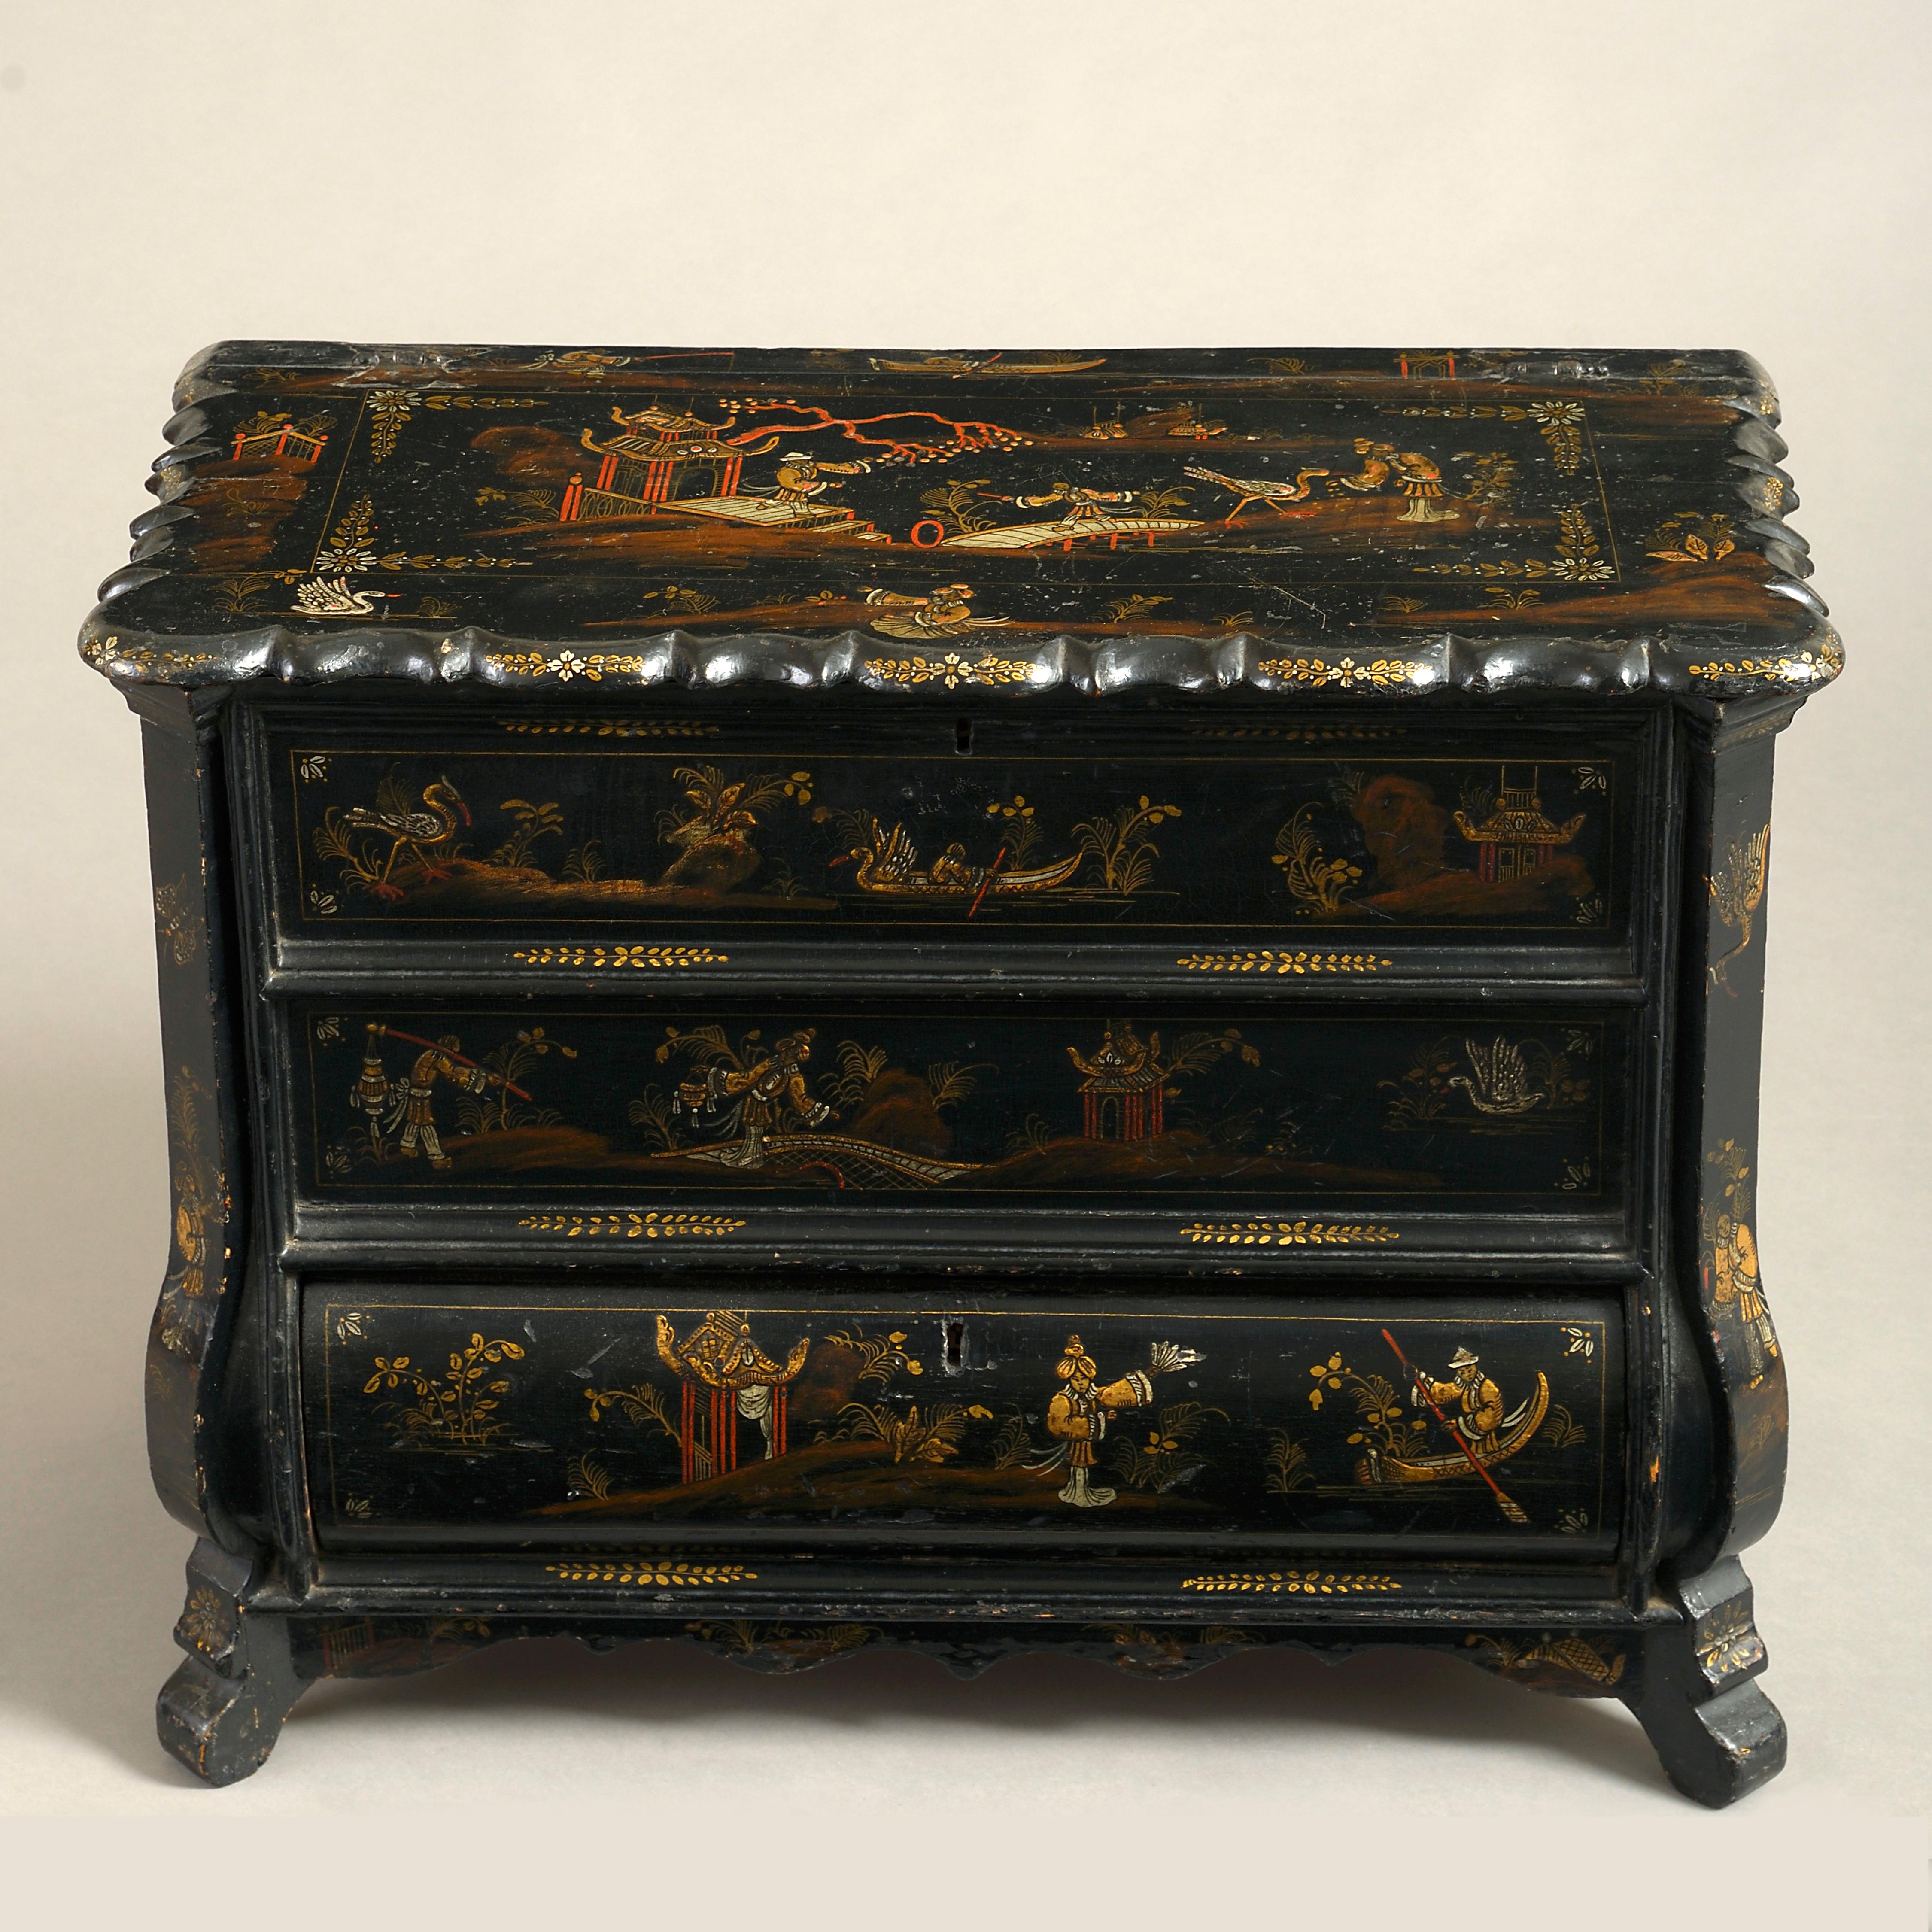 A charming mid-18th century black japanned work box, in the form of a miniature bombé commode, the overhanging shaped top and bottom drawer opening to reveal red painted compartments, decorated throughout with gilded chinoiserie.